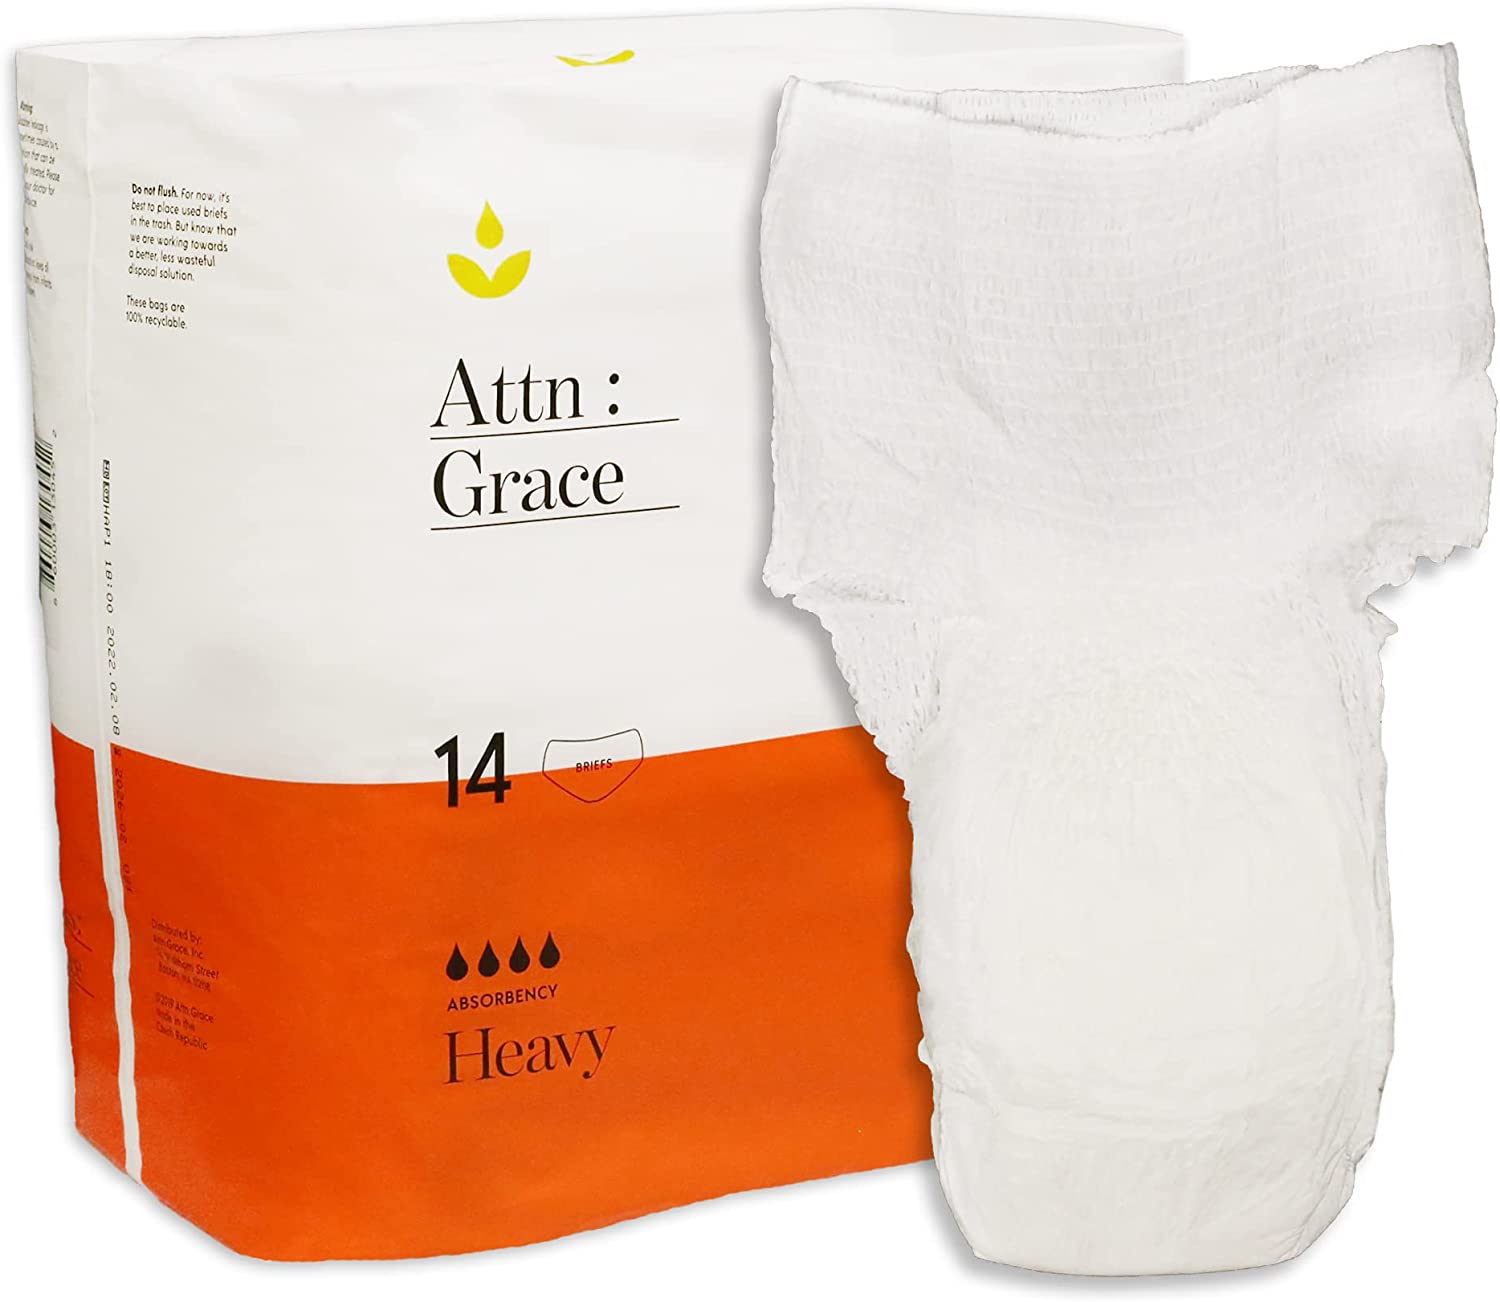 Attn: Grace Ultimate Incontinence Briefs for Women (14-Pack) – High Absorbency Underwear, Sensitive Skin Protection for Moderate Bladder Leaks or Postpartum / Comfortable / Odor Control (Large)